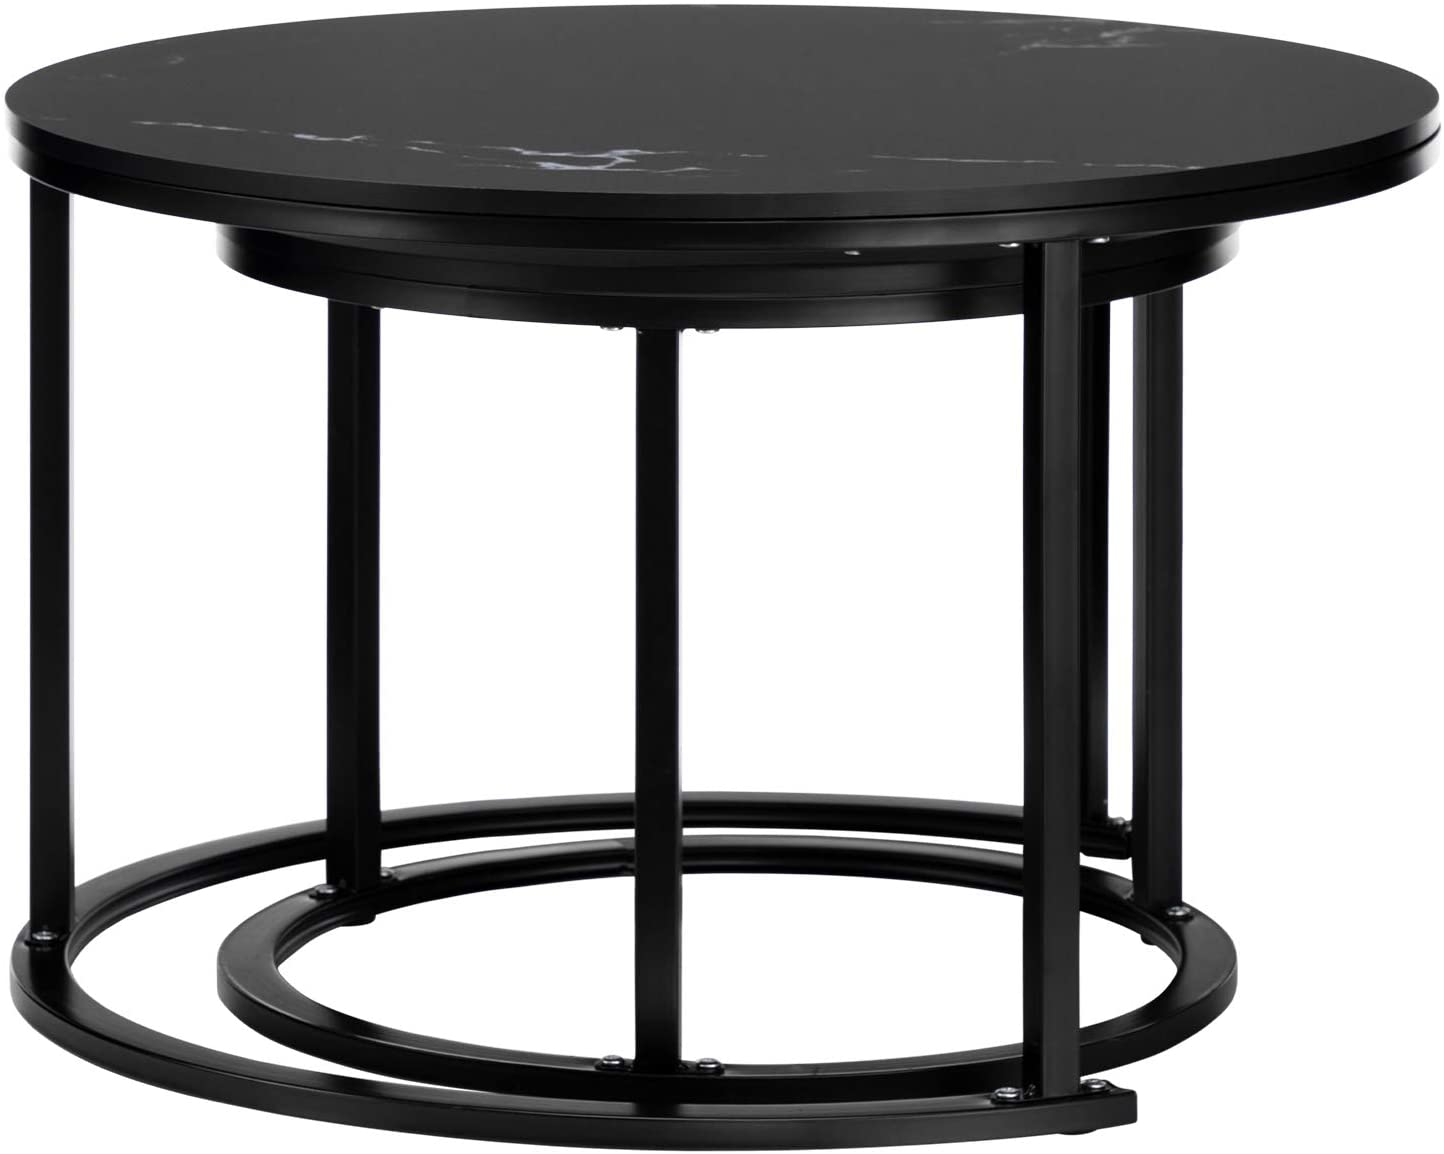 Nest Of Tables Table Set of 2, Wood Coffee and Snack End Table with Metal Frame, Accent Tea Table for Living Room